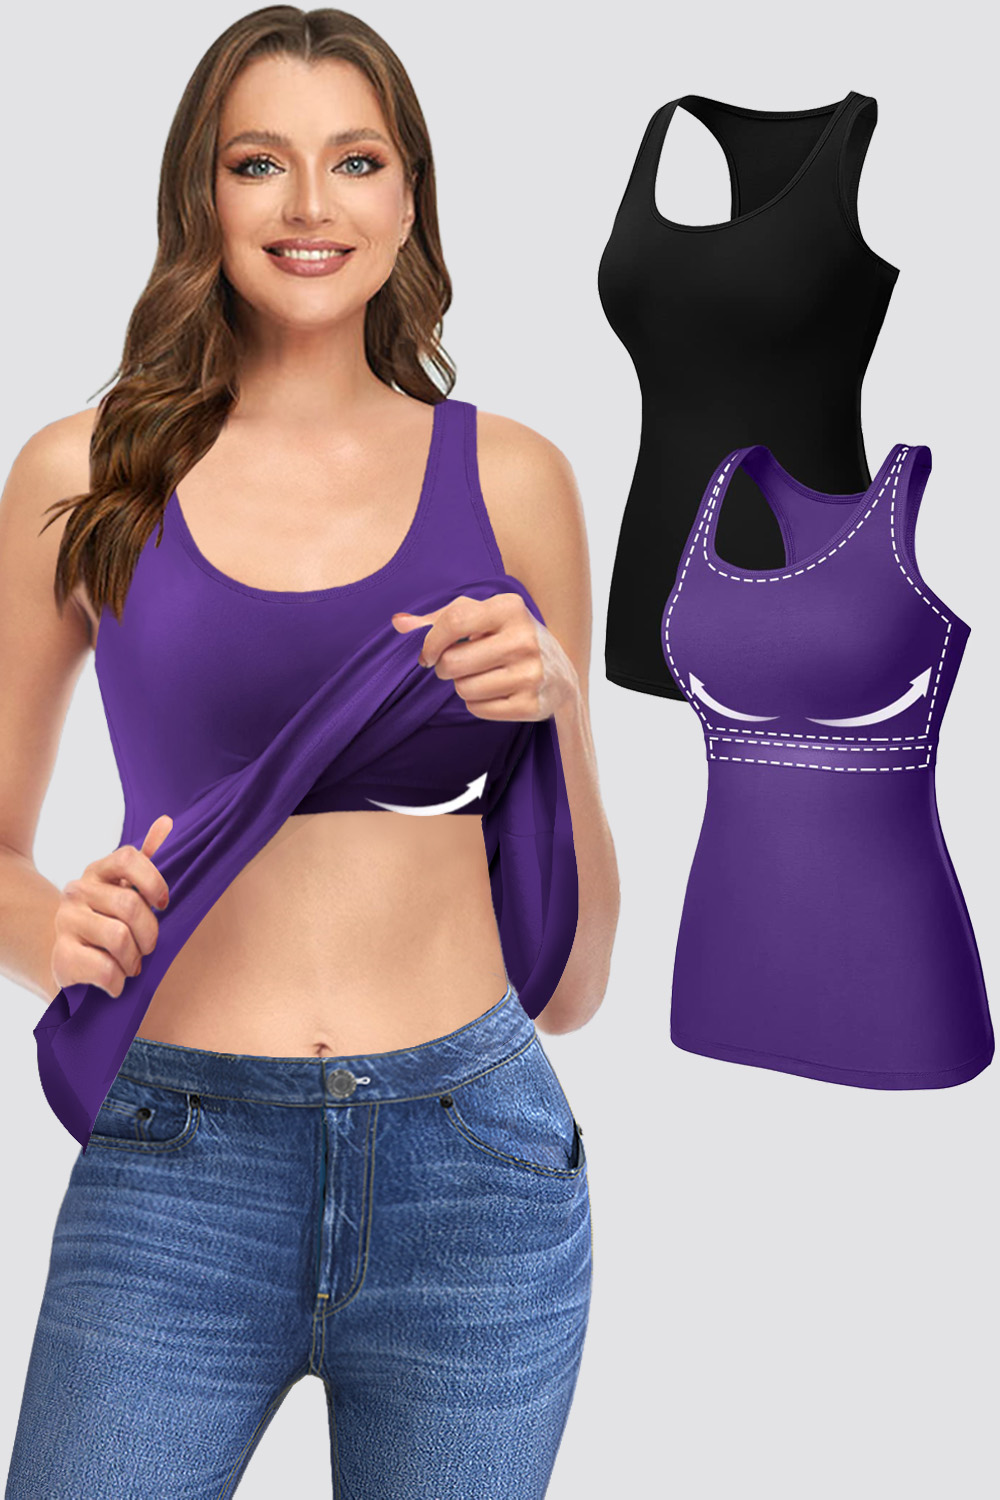 Flycurvy Plus Size Casual Purple Solid Color Tank Top With Built In Bra